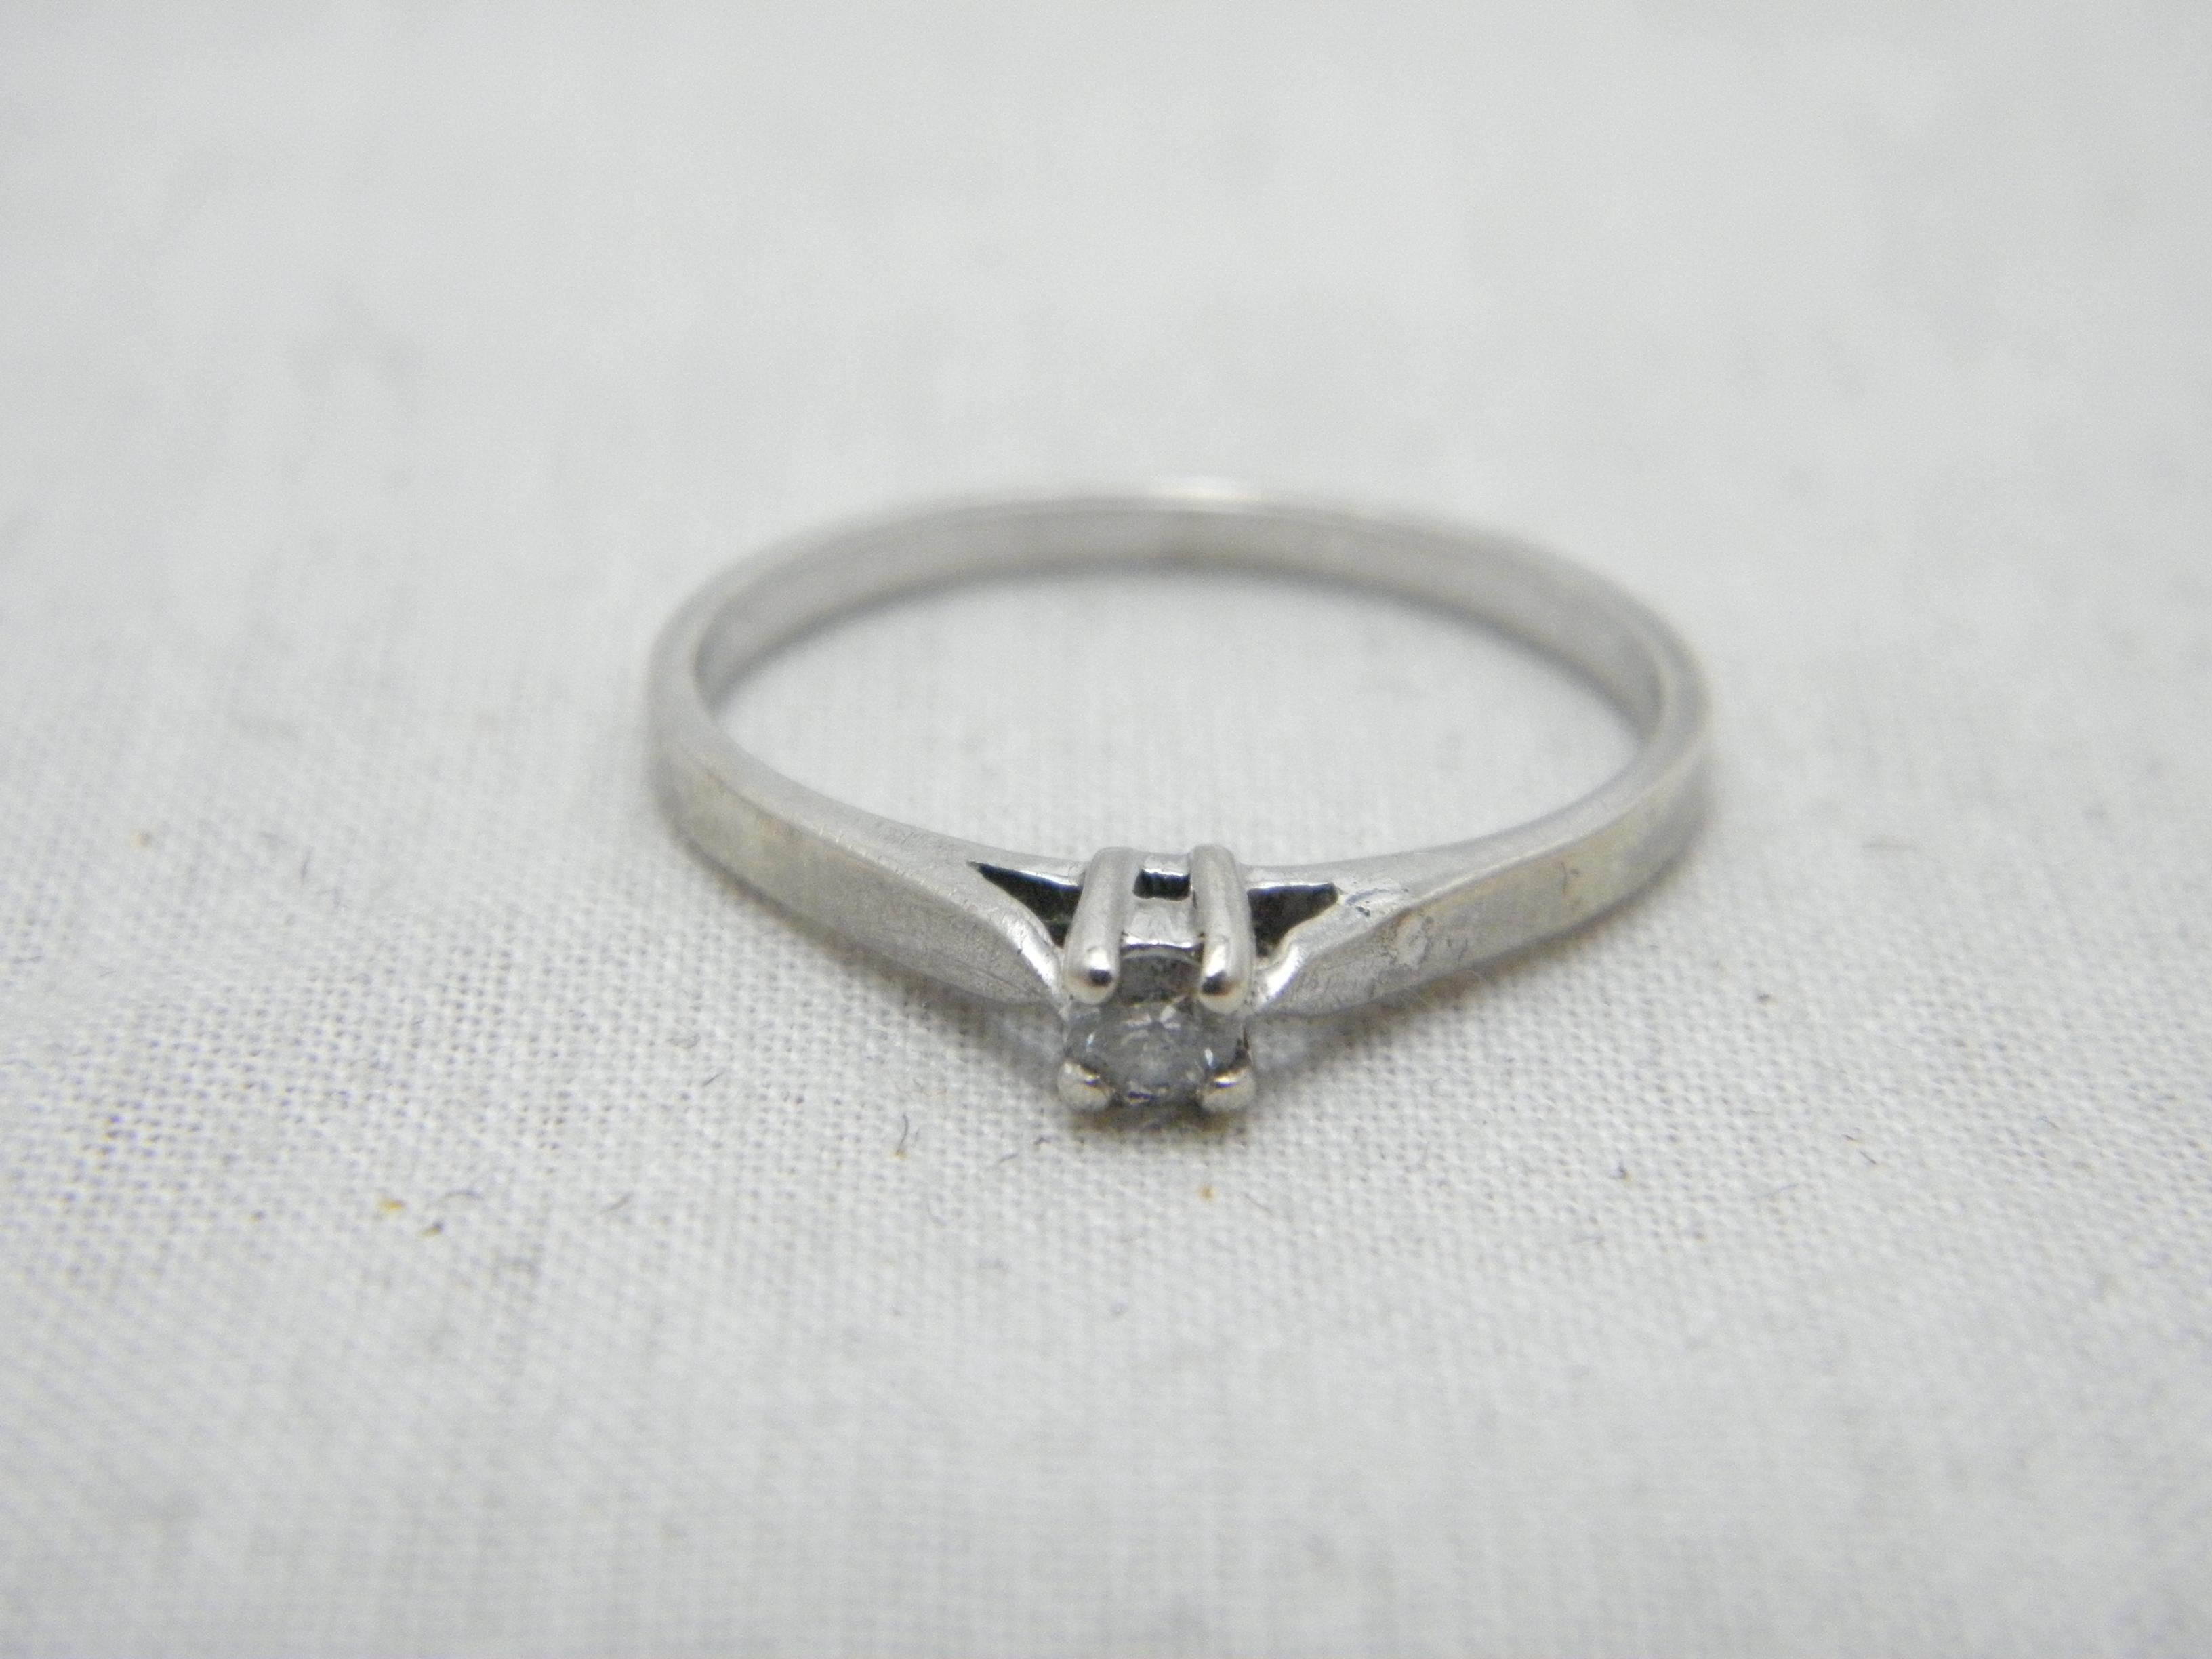 Contemporary Vintage Sterling Silver Diamond Solitaire Ring Size P 7.75 925 Purity Round Cut